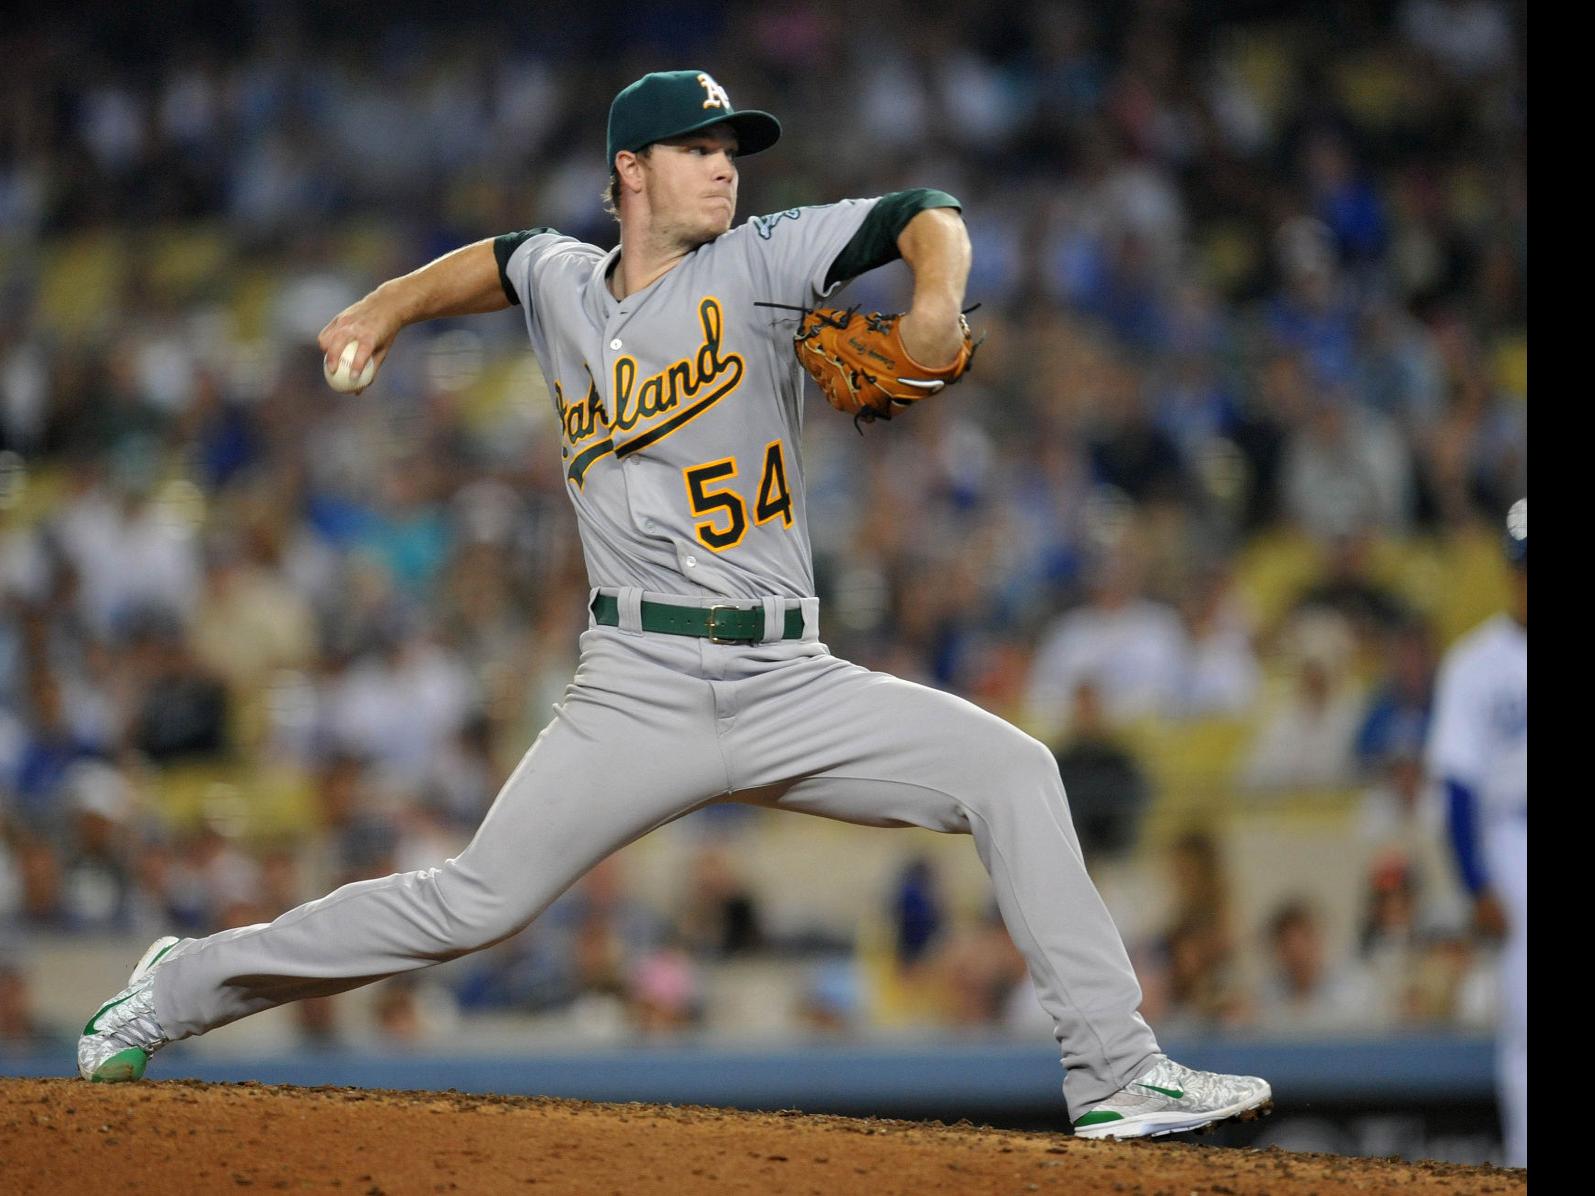 Manaea pitches 7 scoreless innings to end skid against Dodgers as